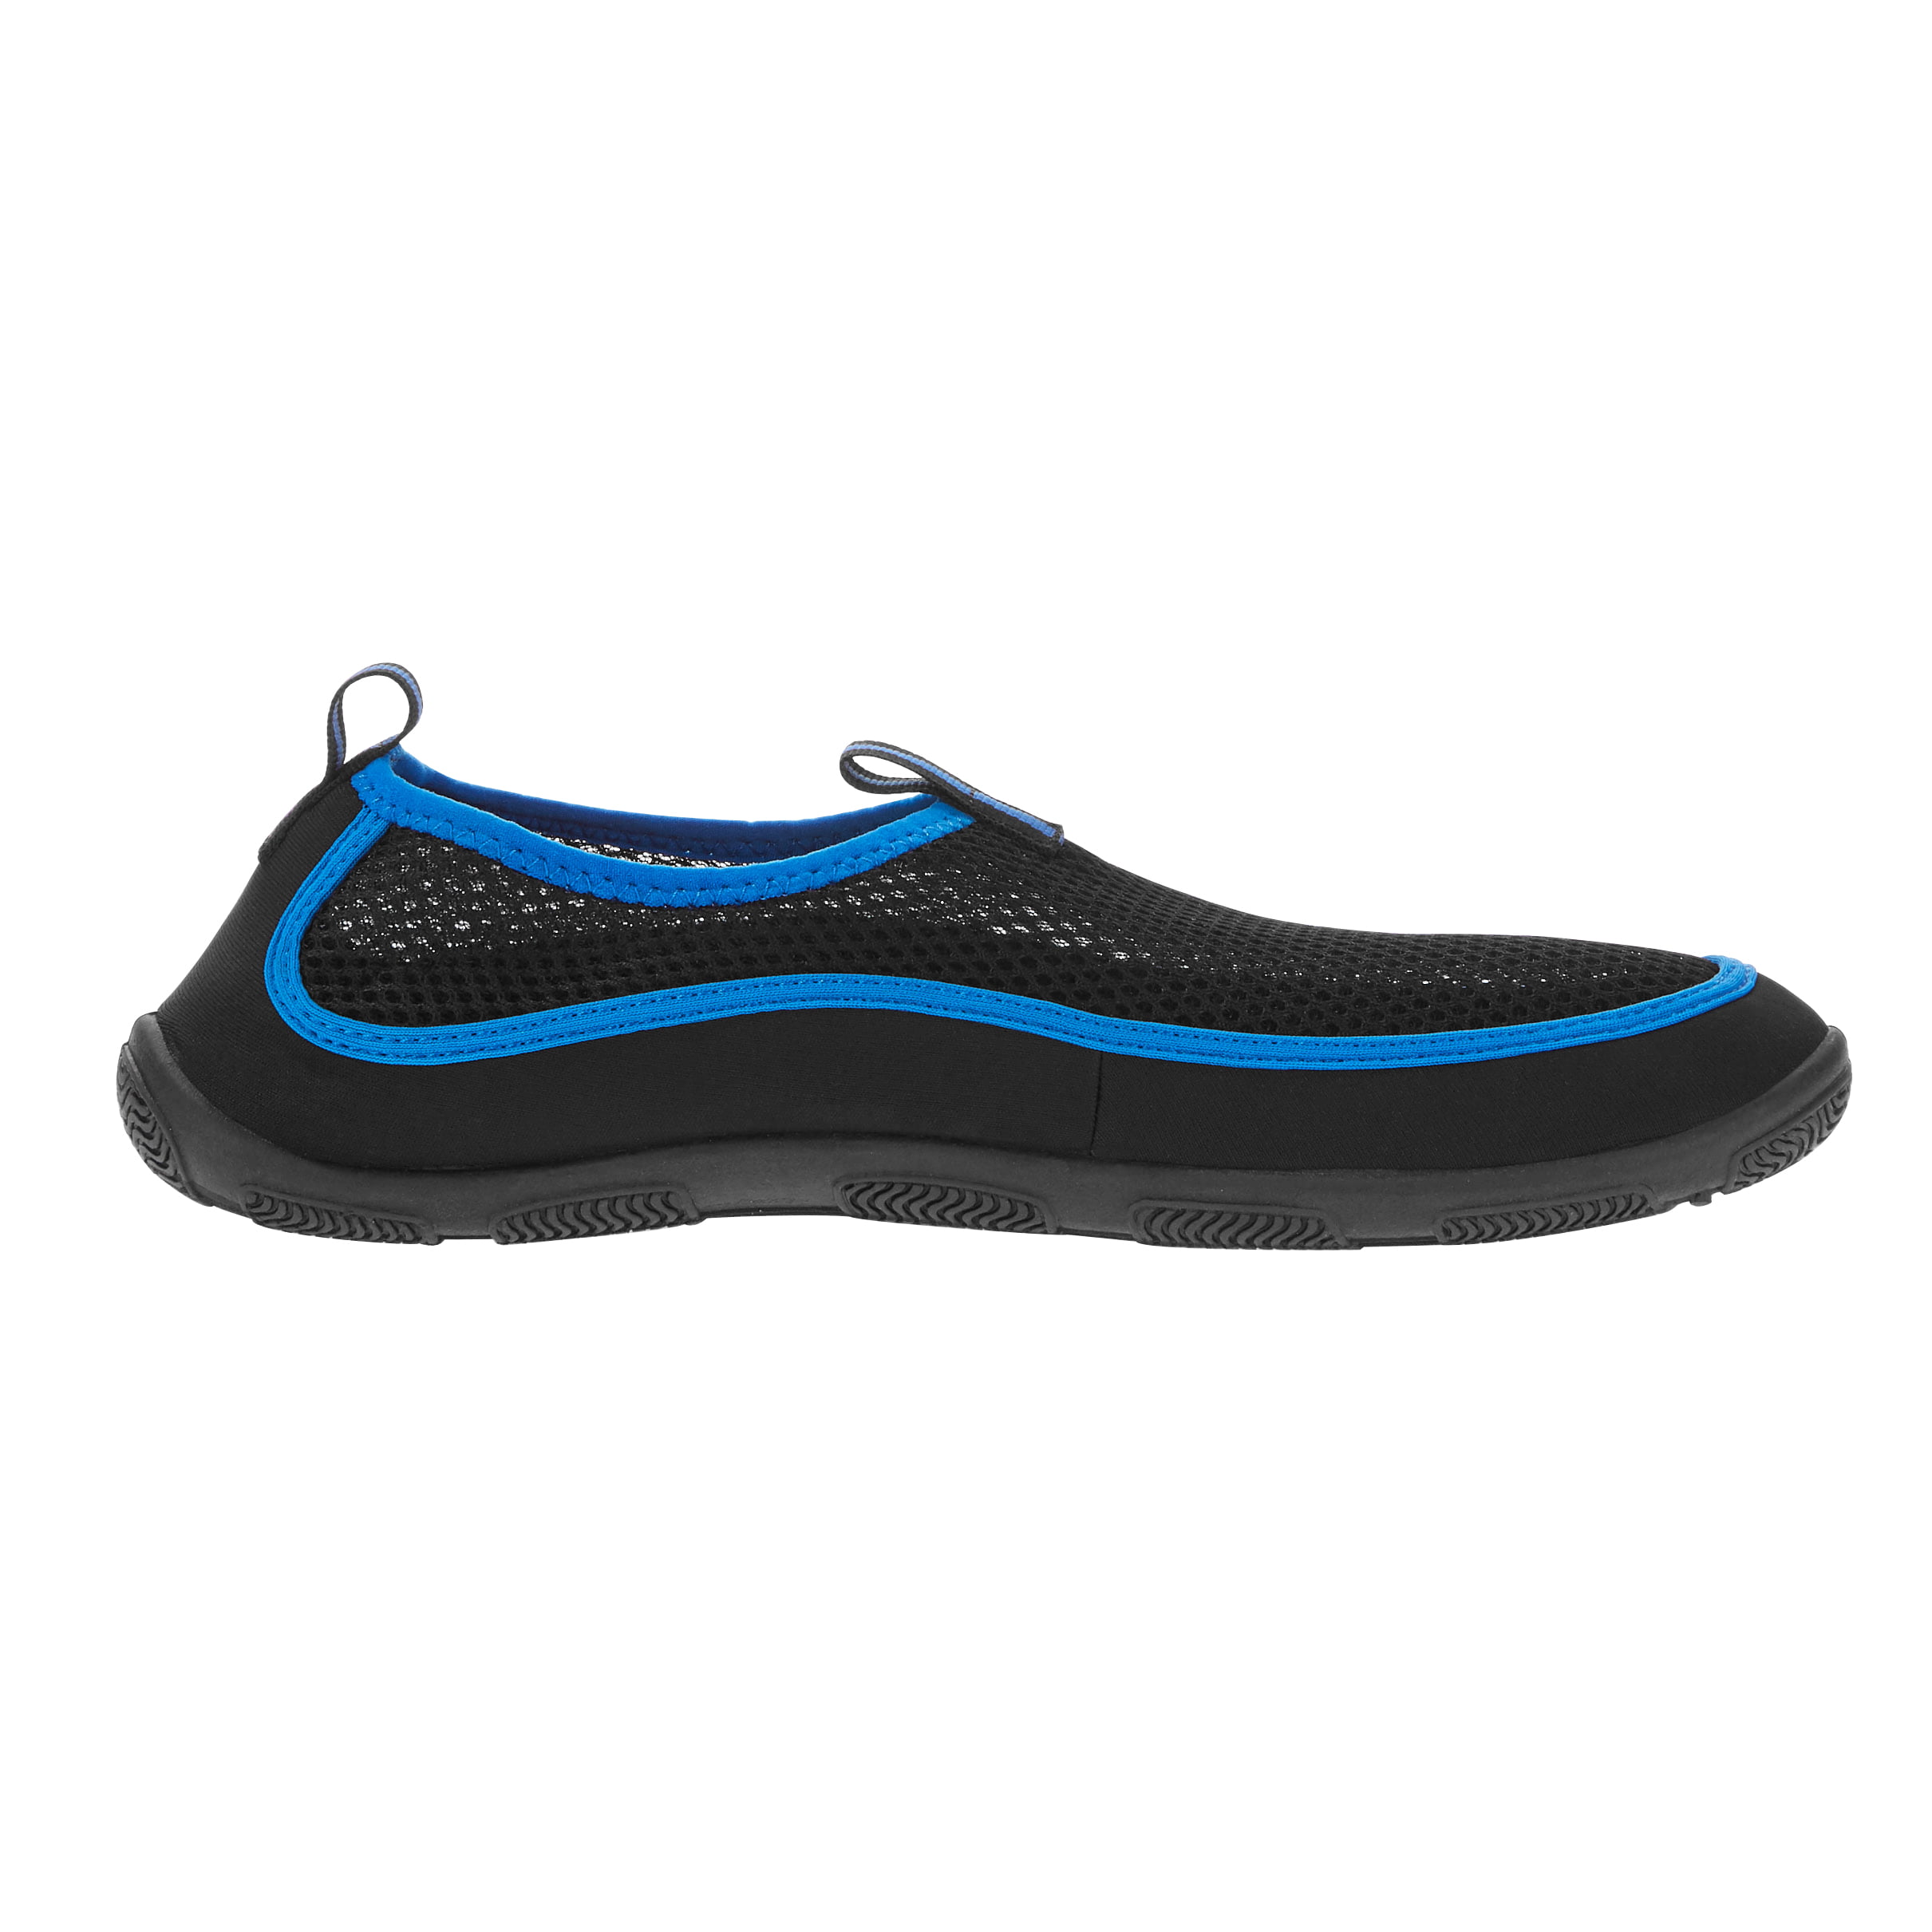 Details about   Mens Water Shoes Quick-drying Adult Beach Swimming River Creek Athletic Shoes 